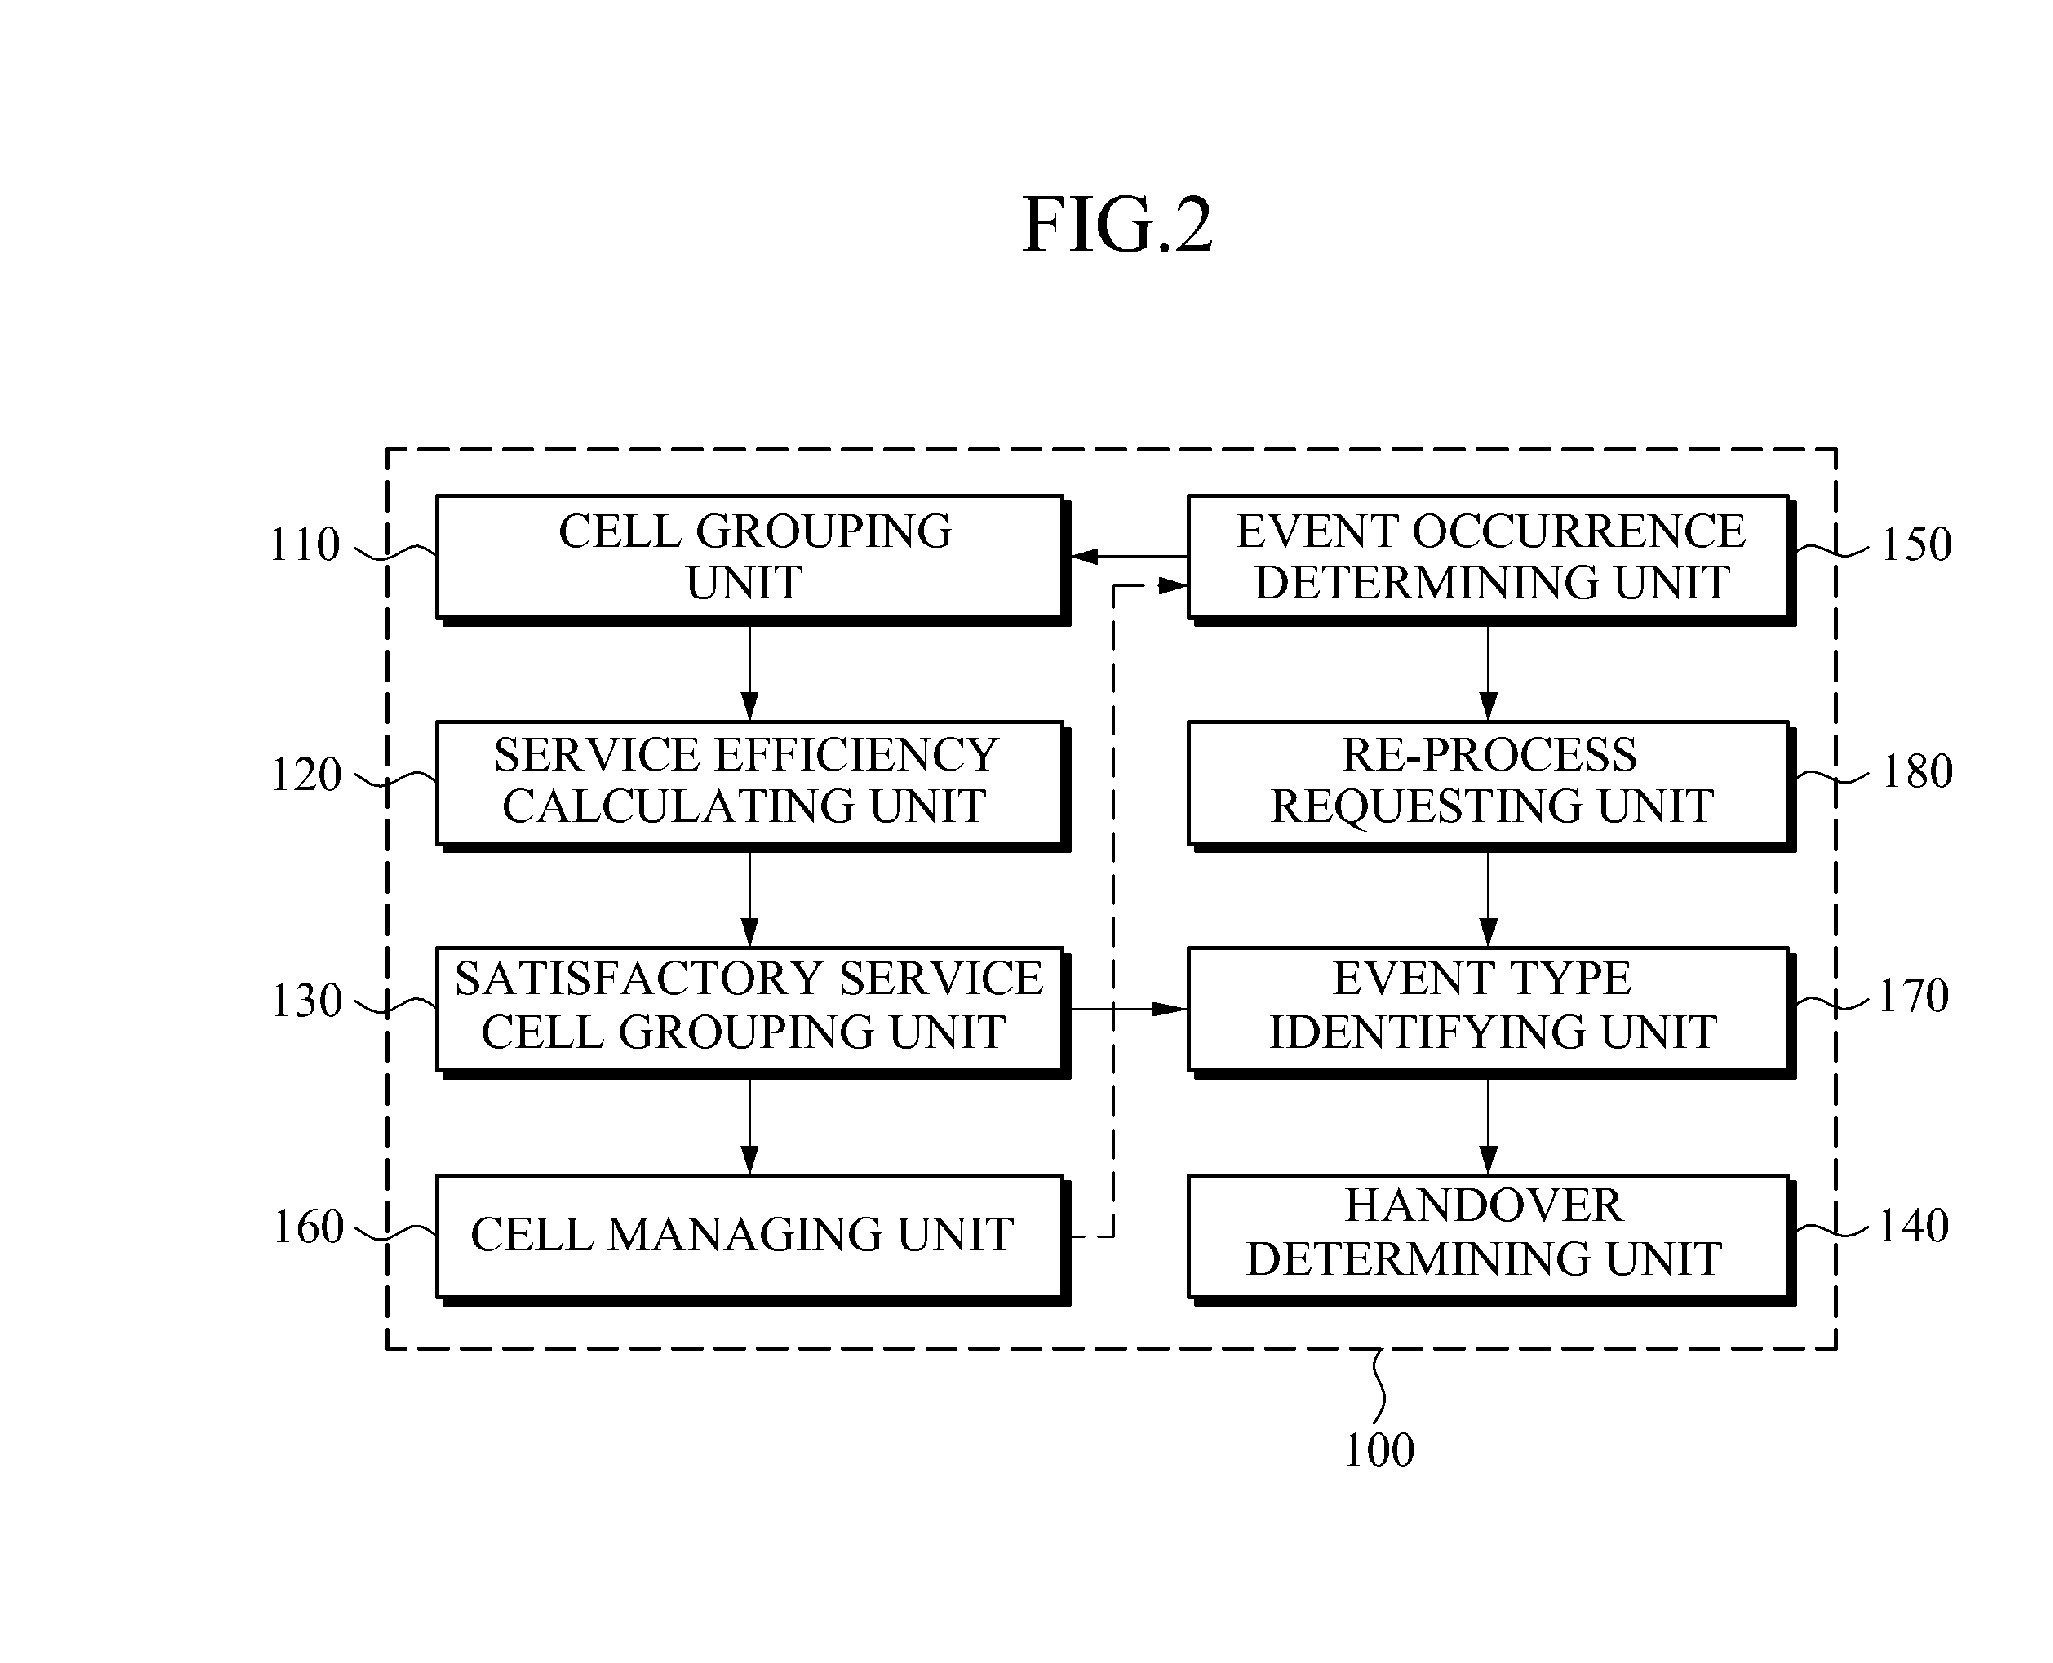 Handover determination apparatus and method in overlay wireless network environment